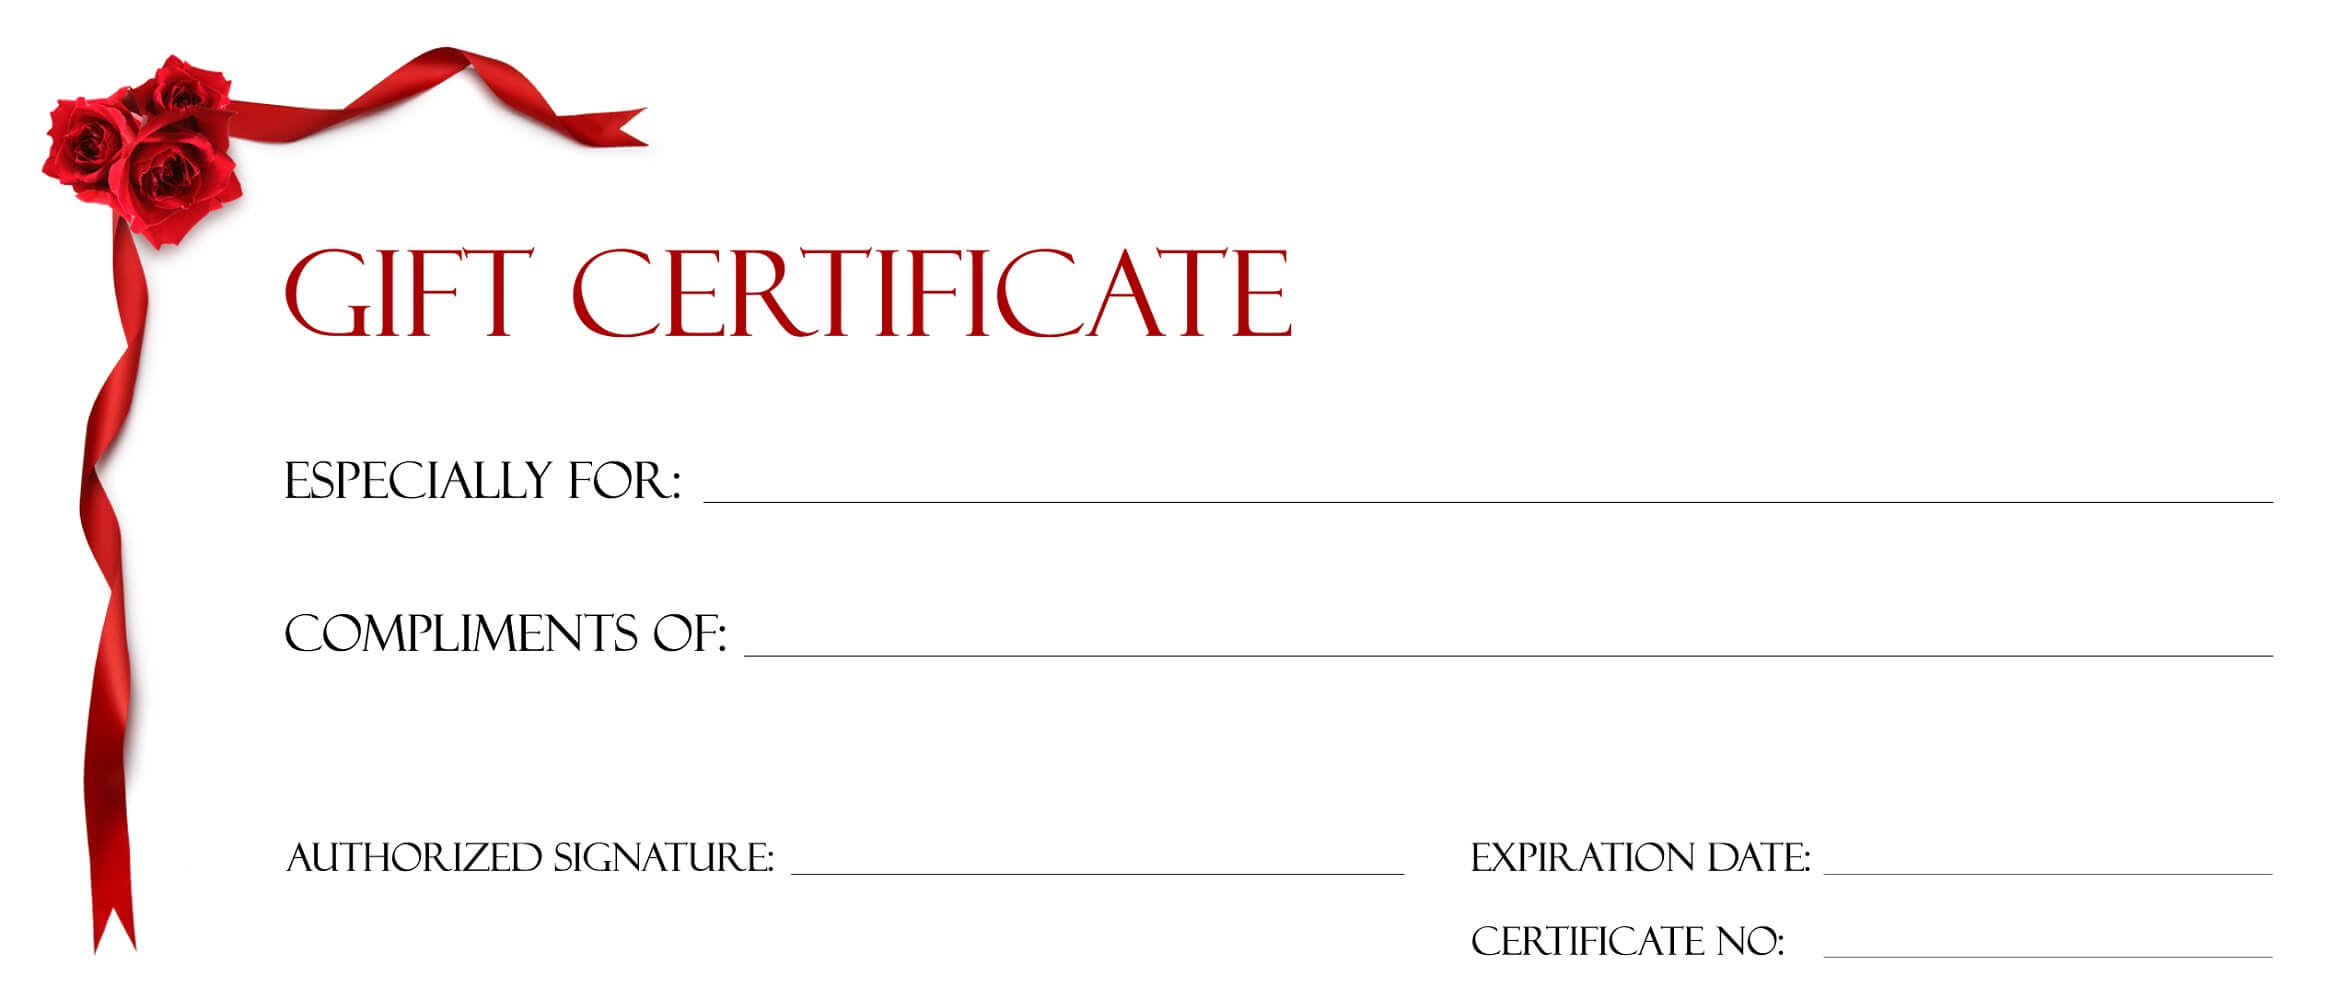 Certificate Templates To Print – Topa.mastersathletics.co For Custom Gift Certificate Template